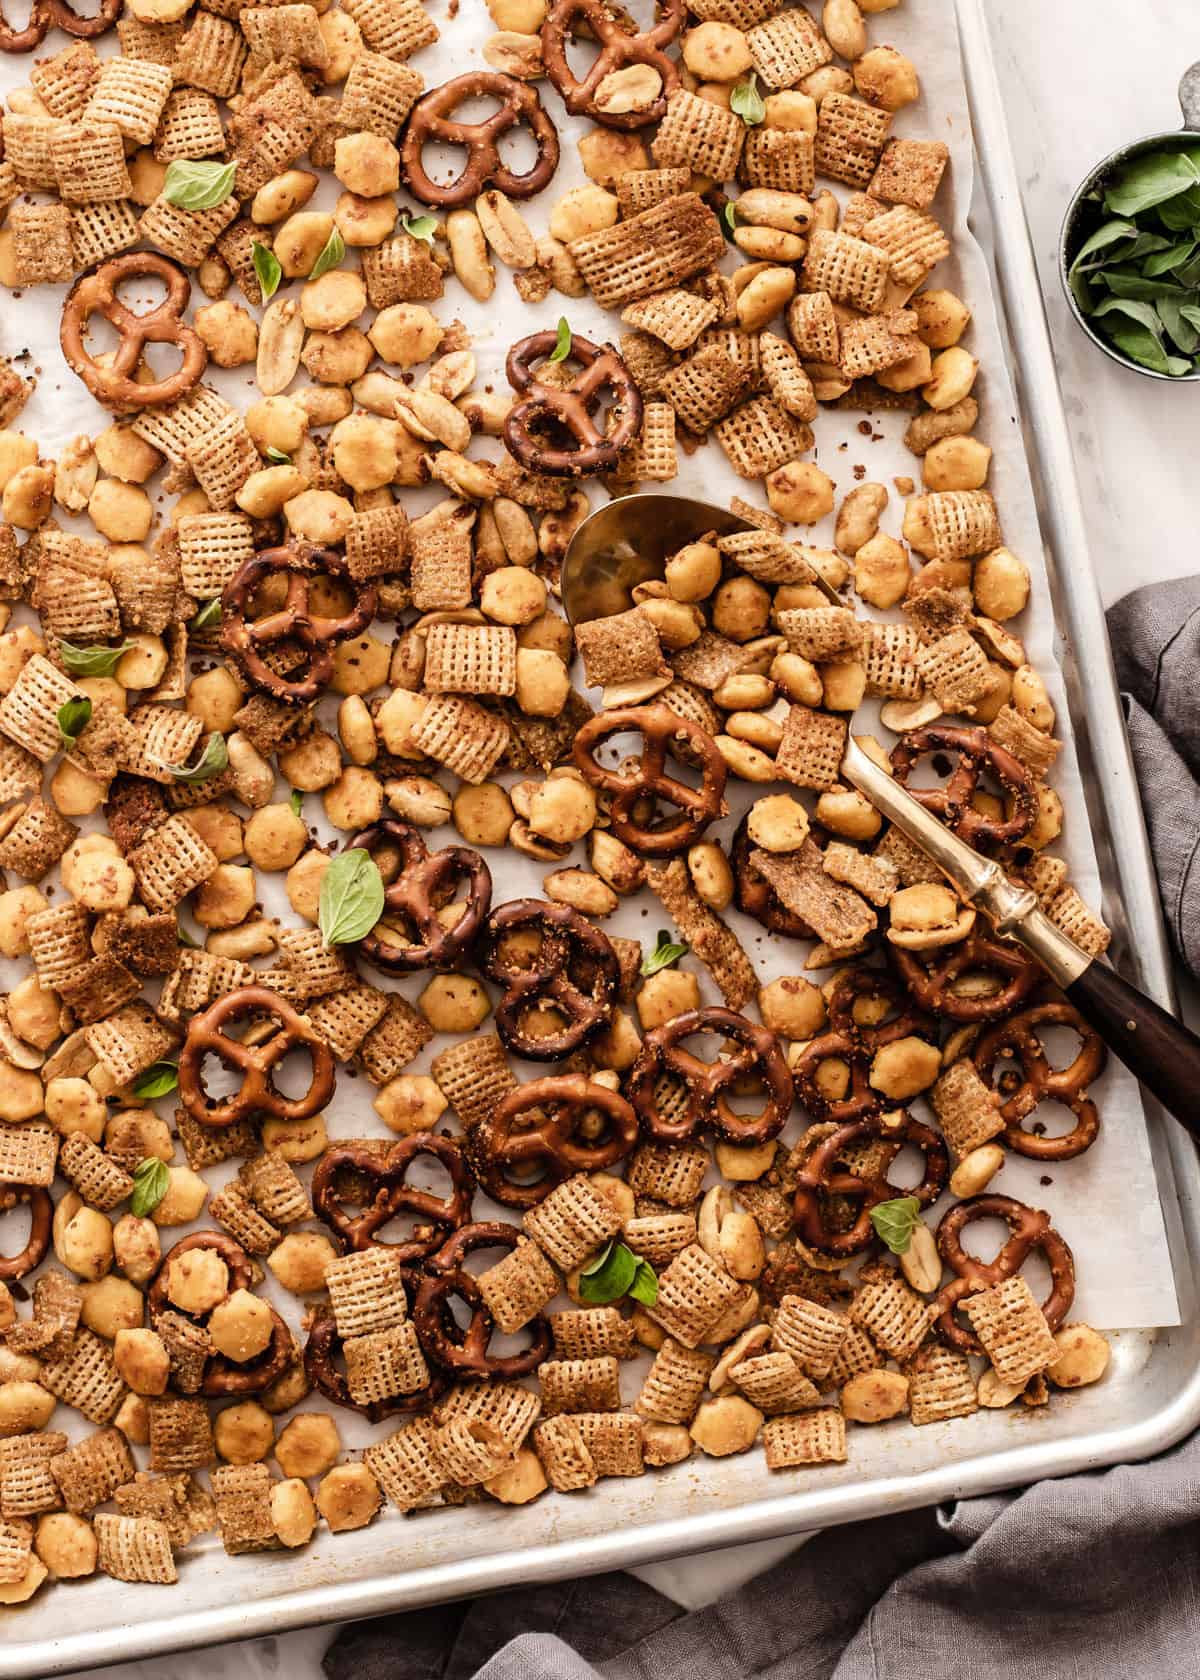 sheet pan with baked Chex mix and spoon to scoop it up.